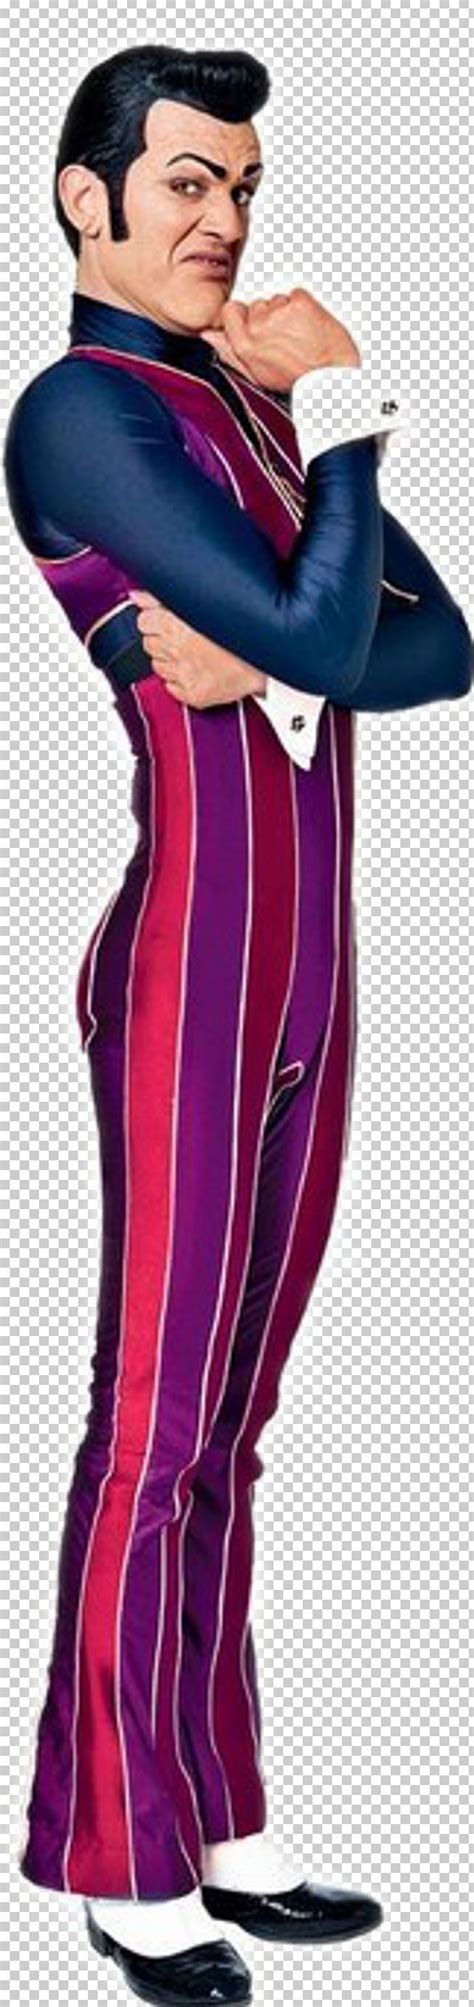 Lazytown Stephanie Sportacus Robbie Rotten Character Png Clipart The